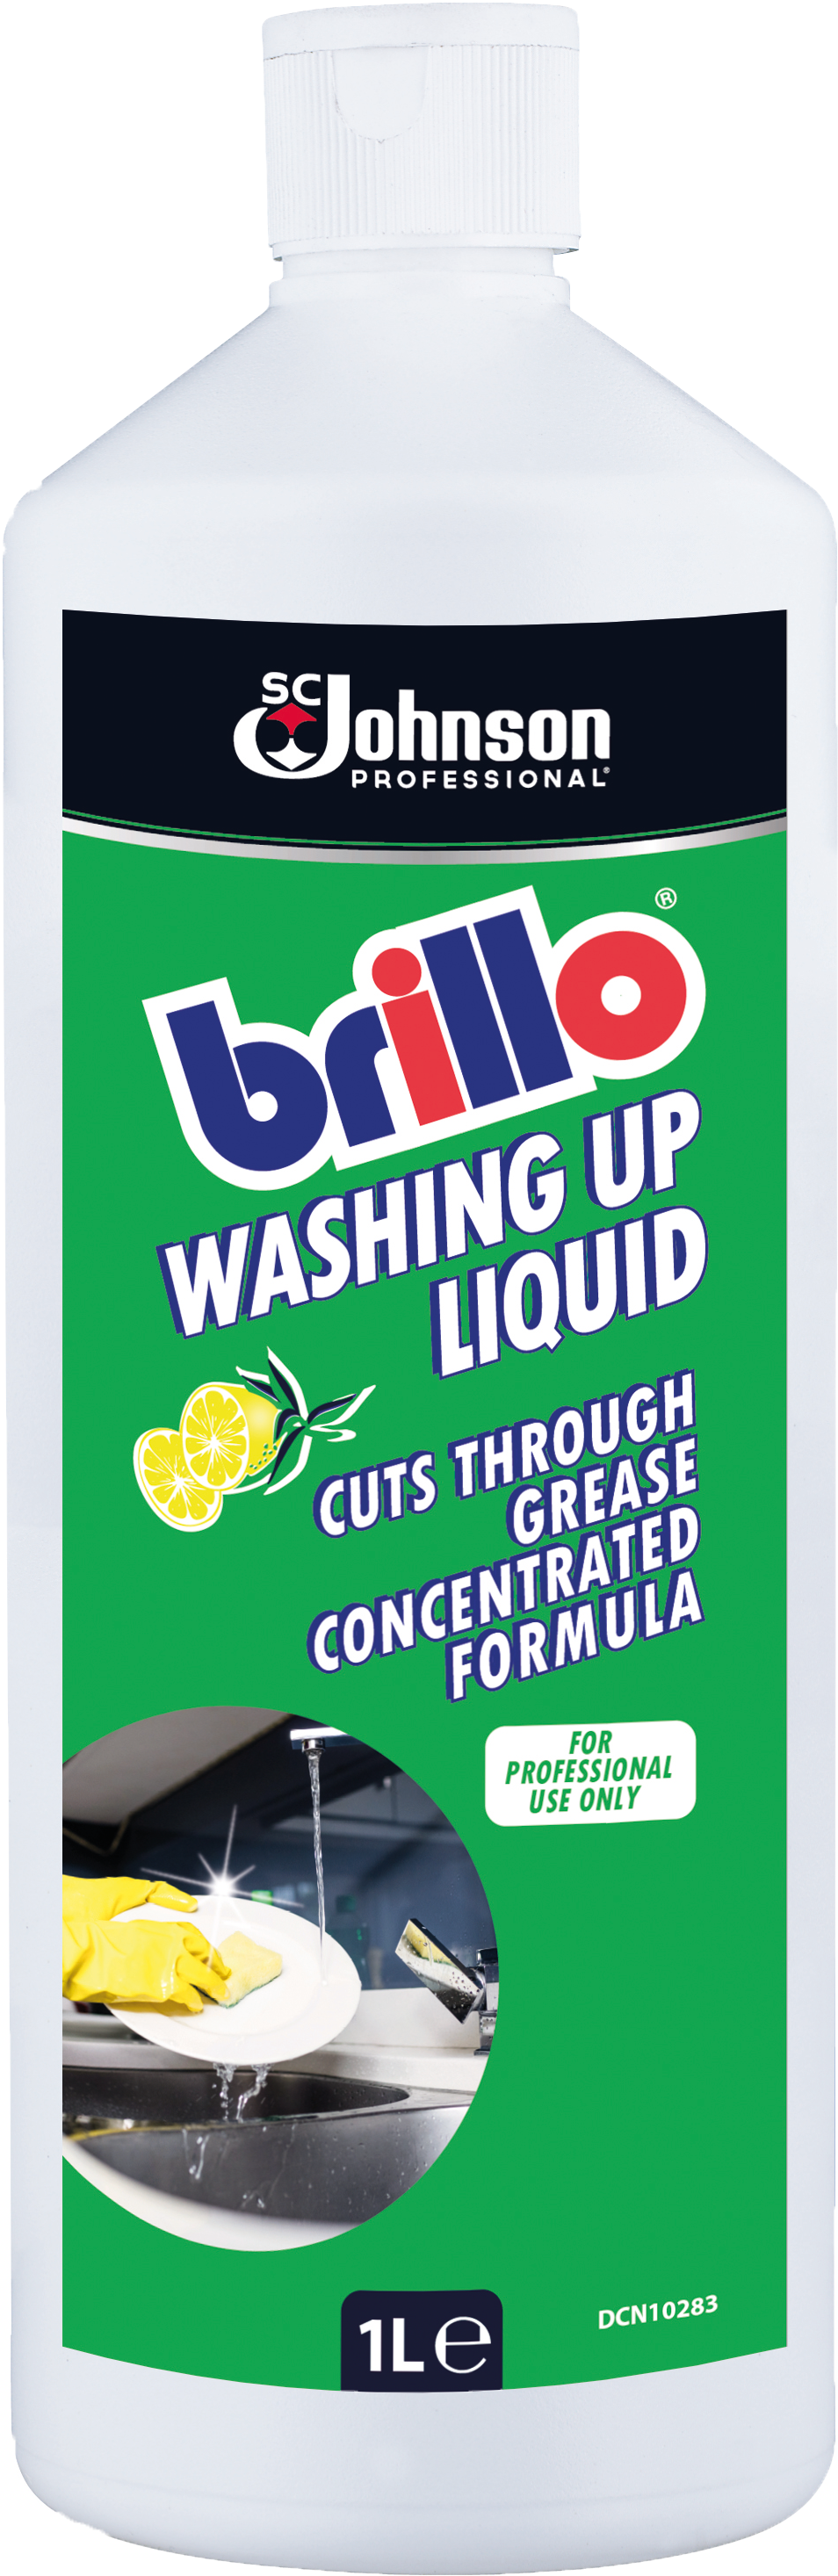 Brillo Washing Up Liquid - Brillo Washing Up Liquid 5ltr (1771x3228), Png Download